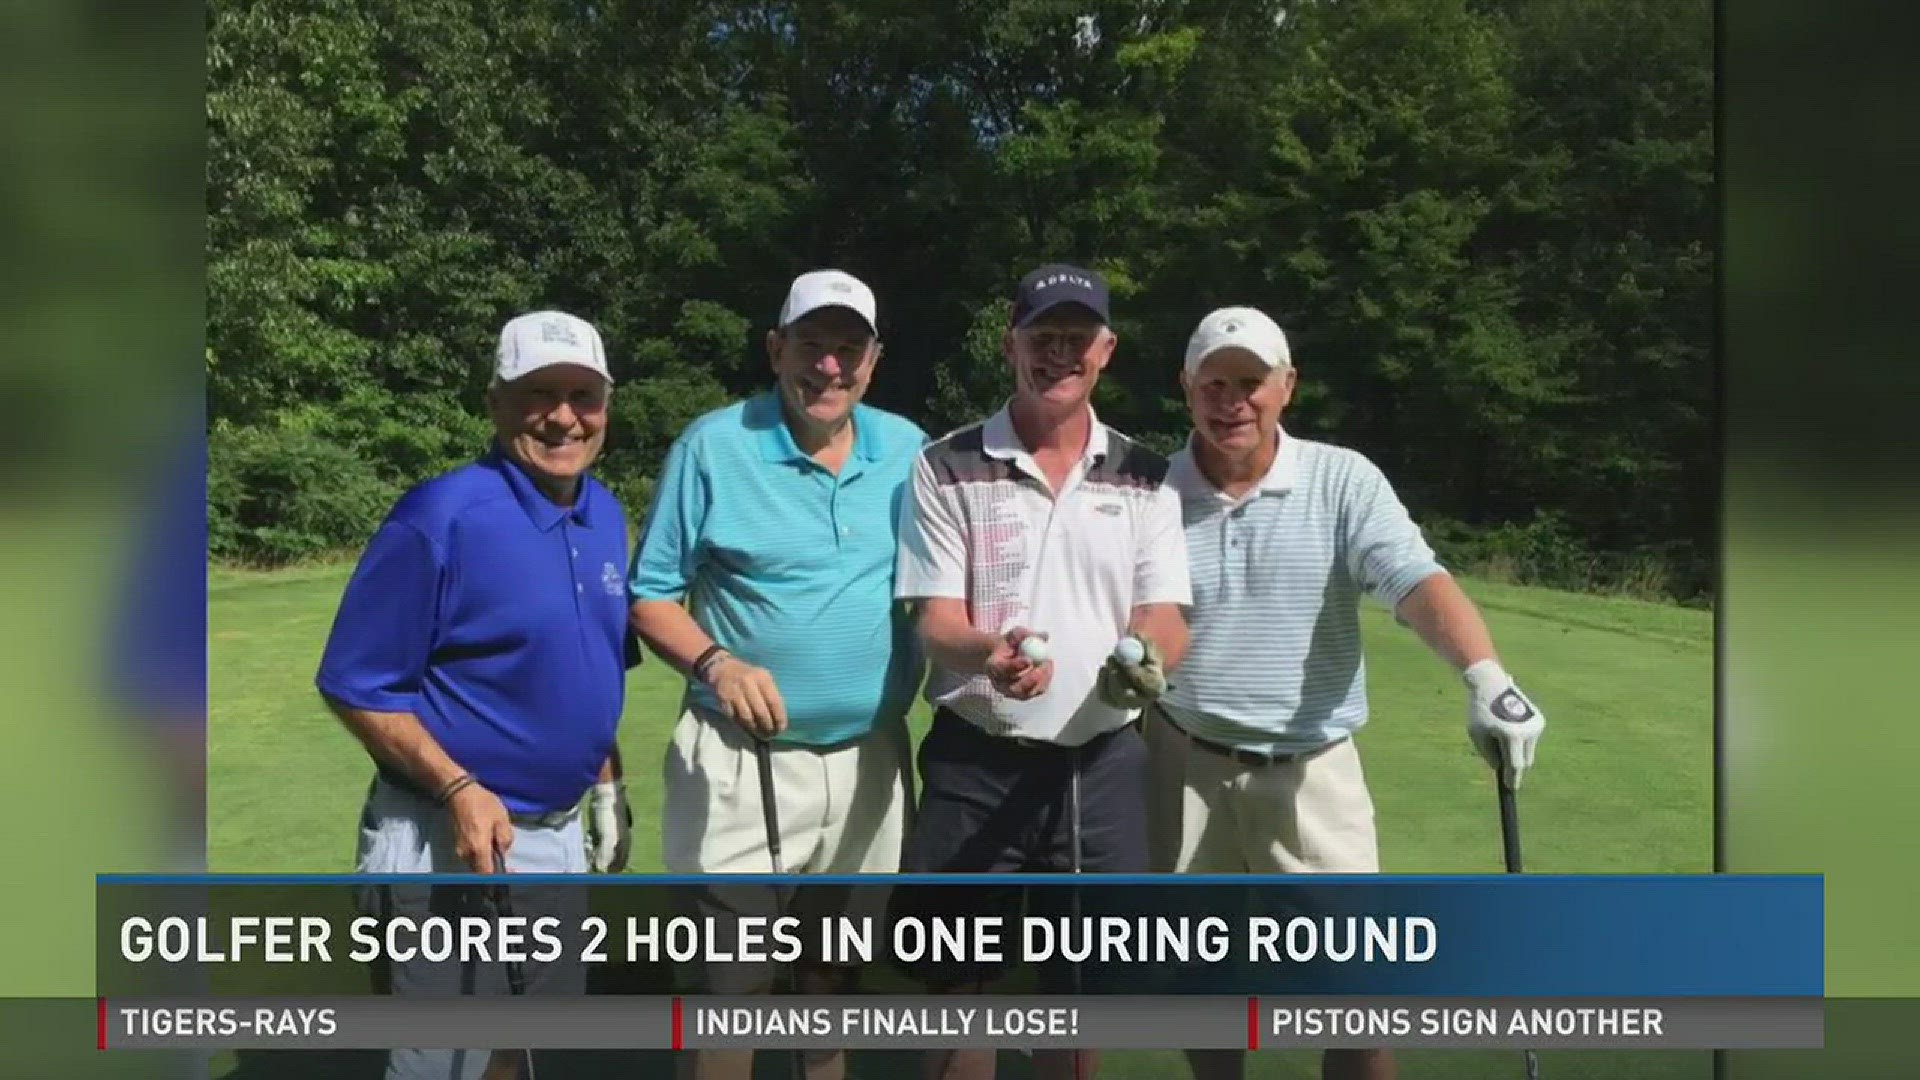 Golfer scores 2 hole in ones during round